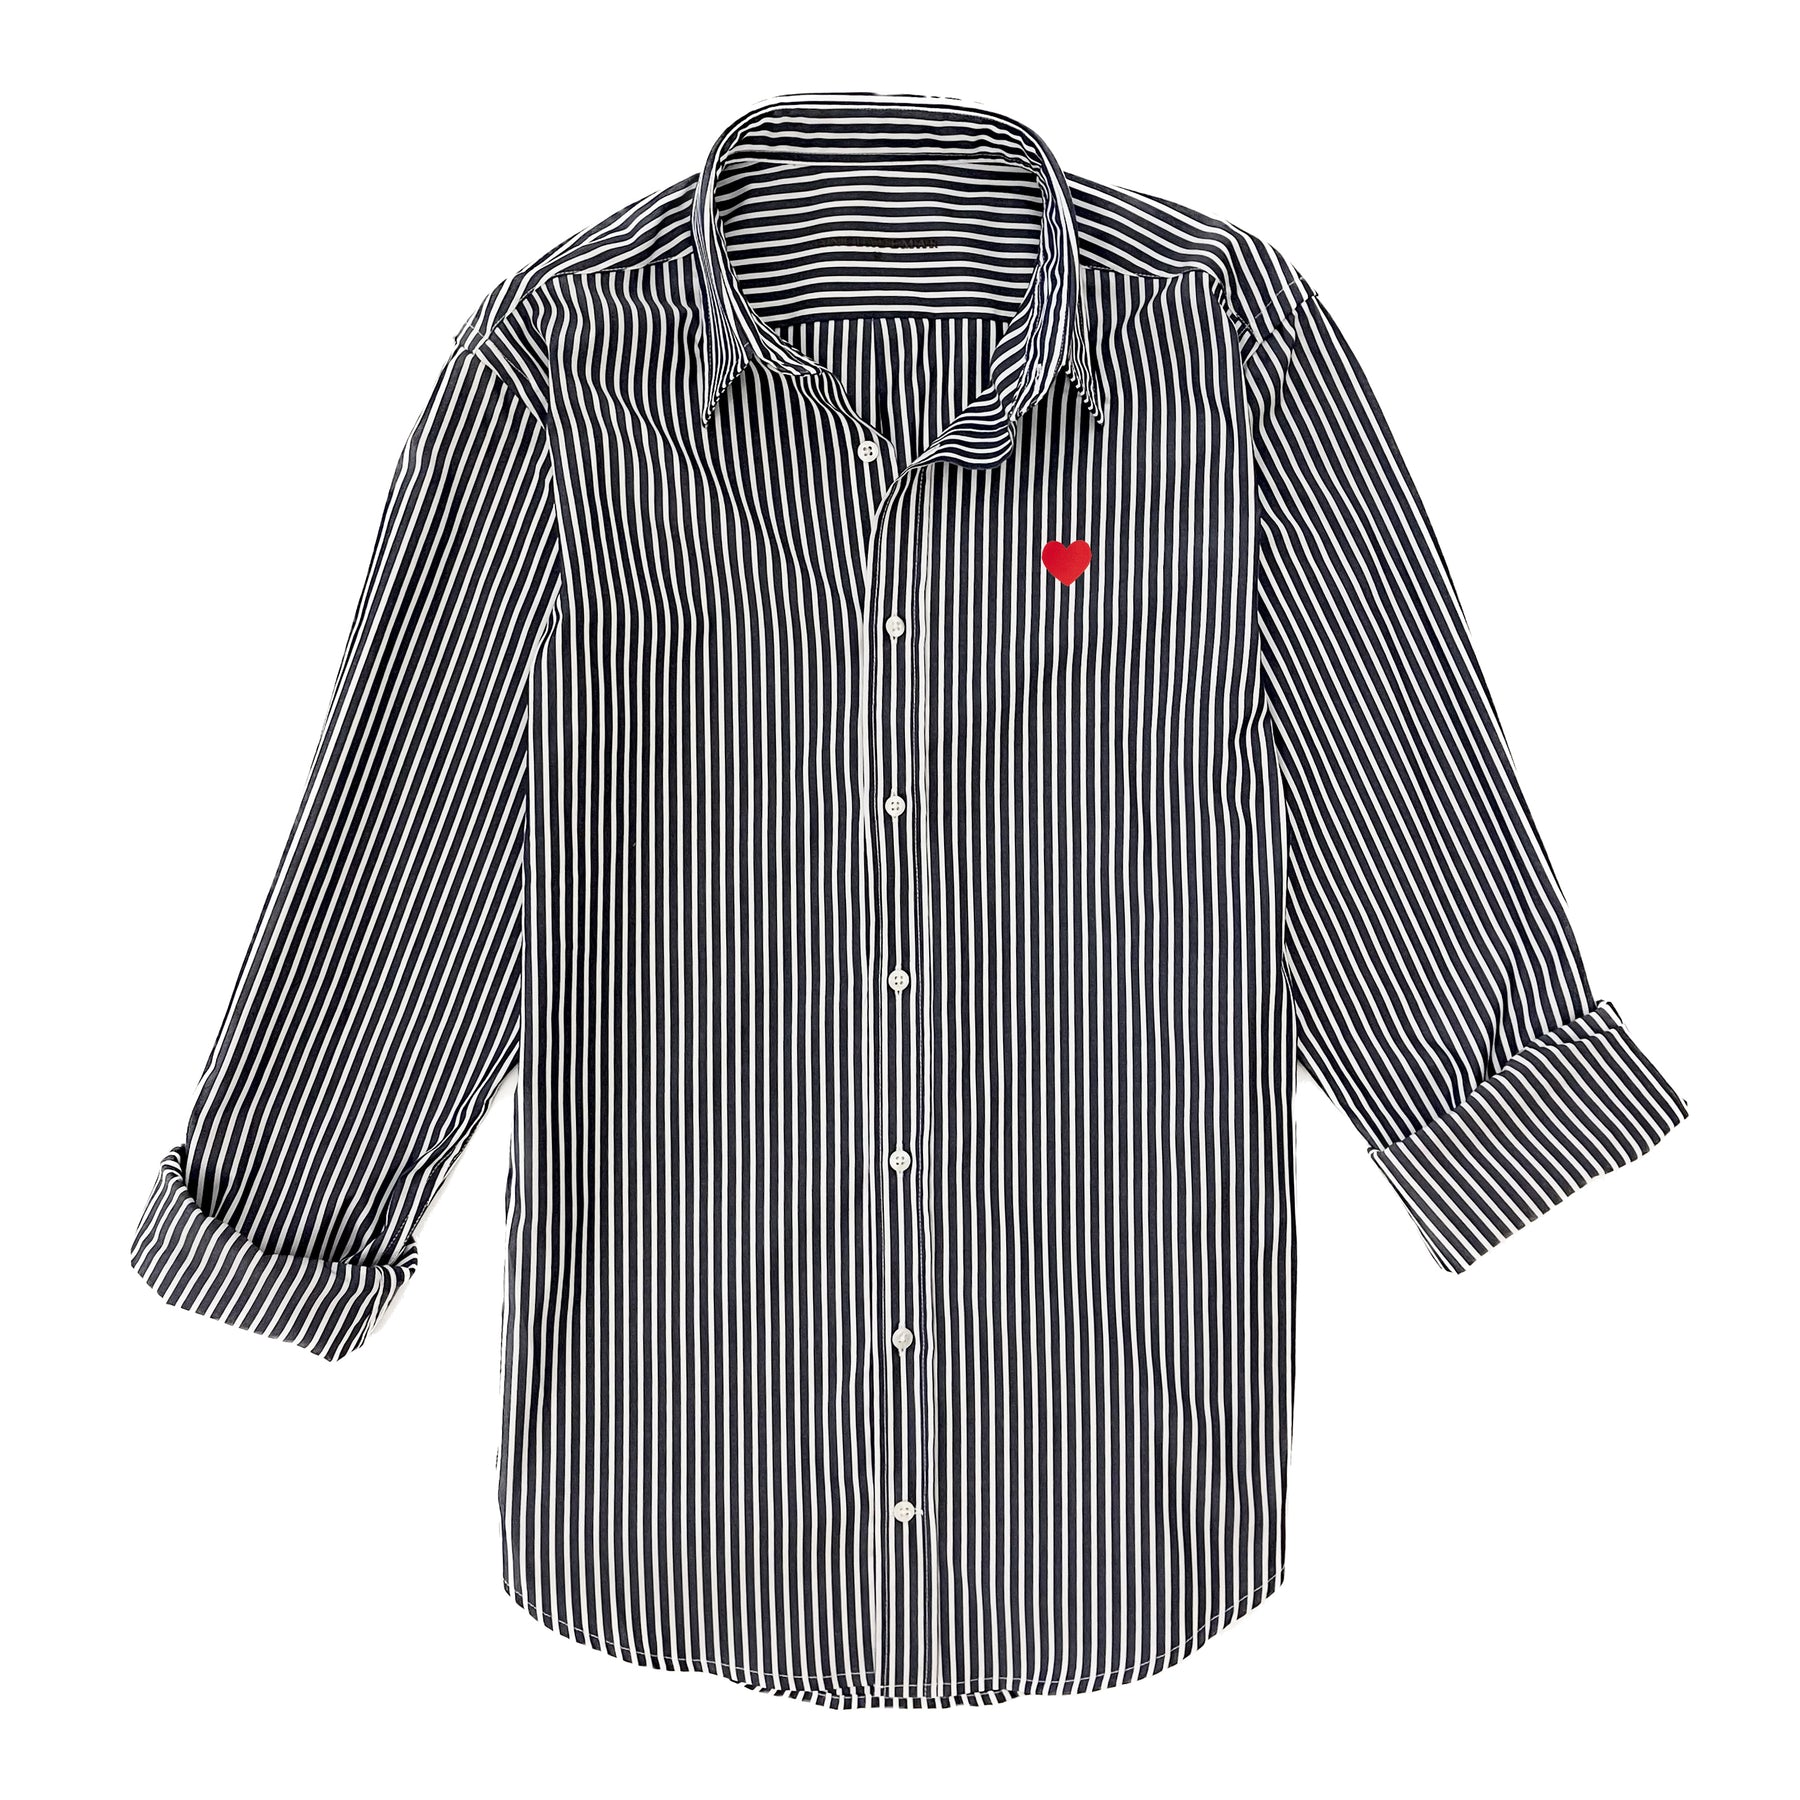 Heart Embroidered Blue Oxford Shirt